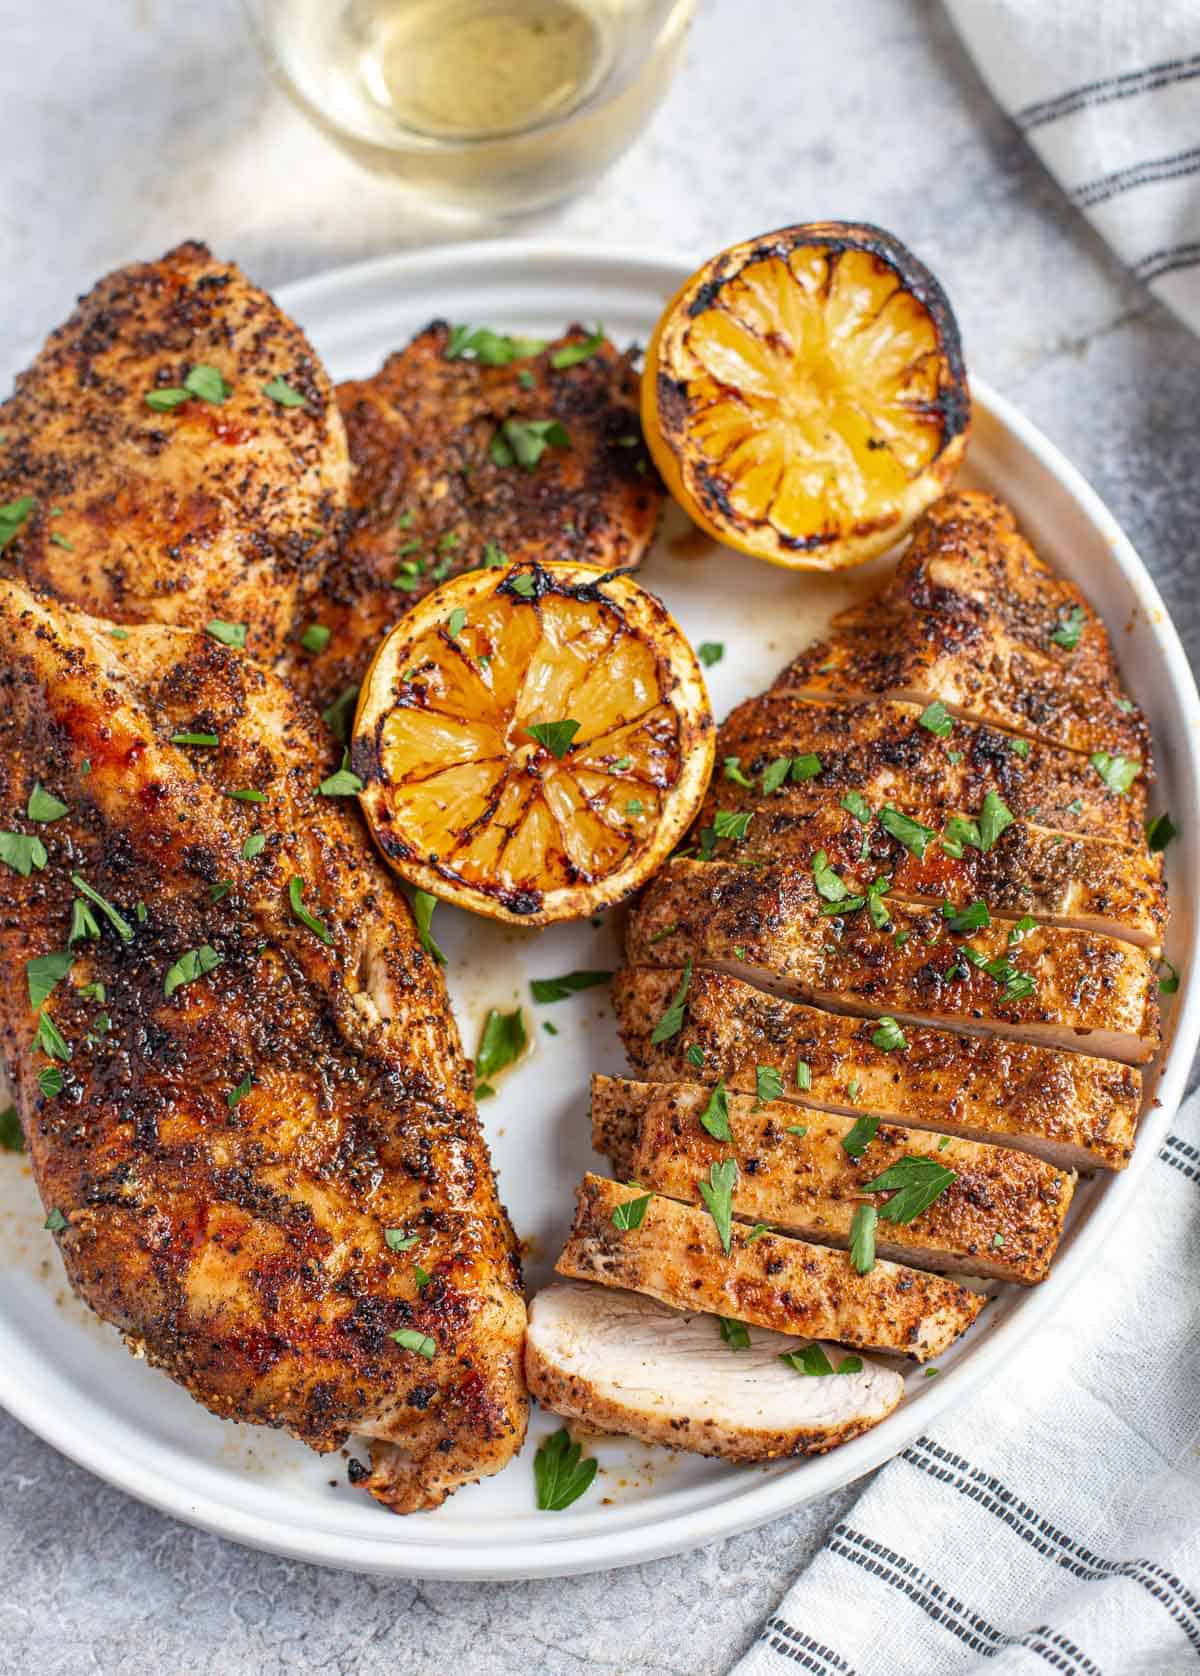 Grilled boneless skinless chicken on a plate with grilled lemon garnish.